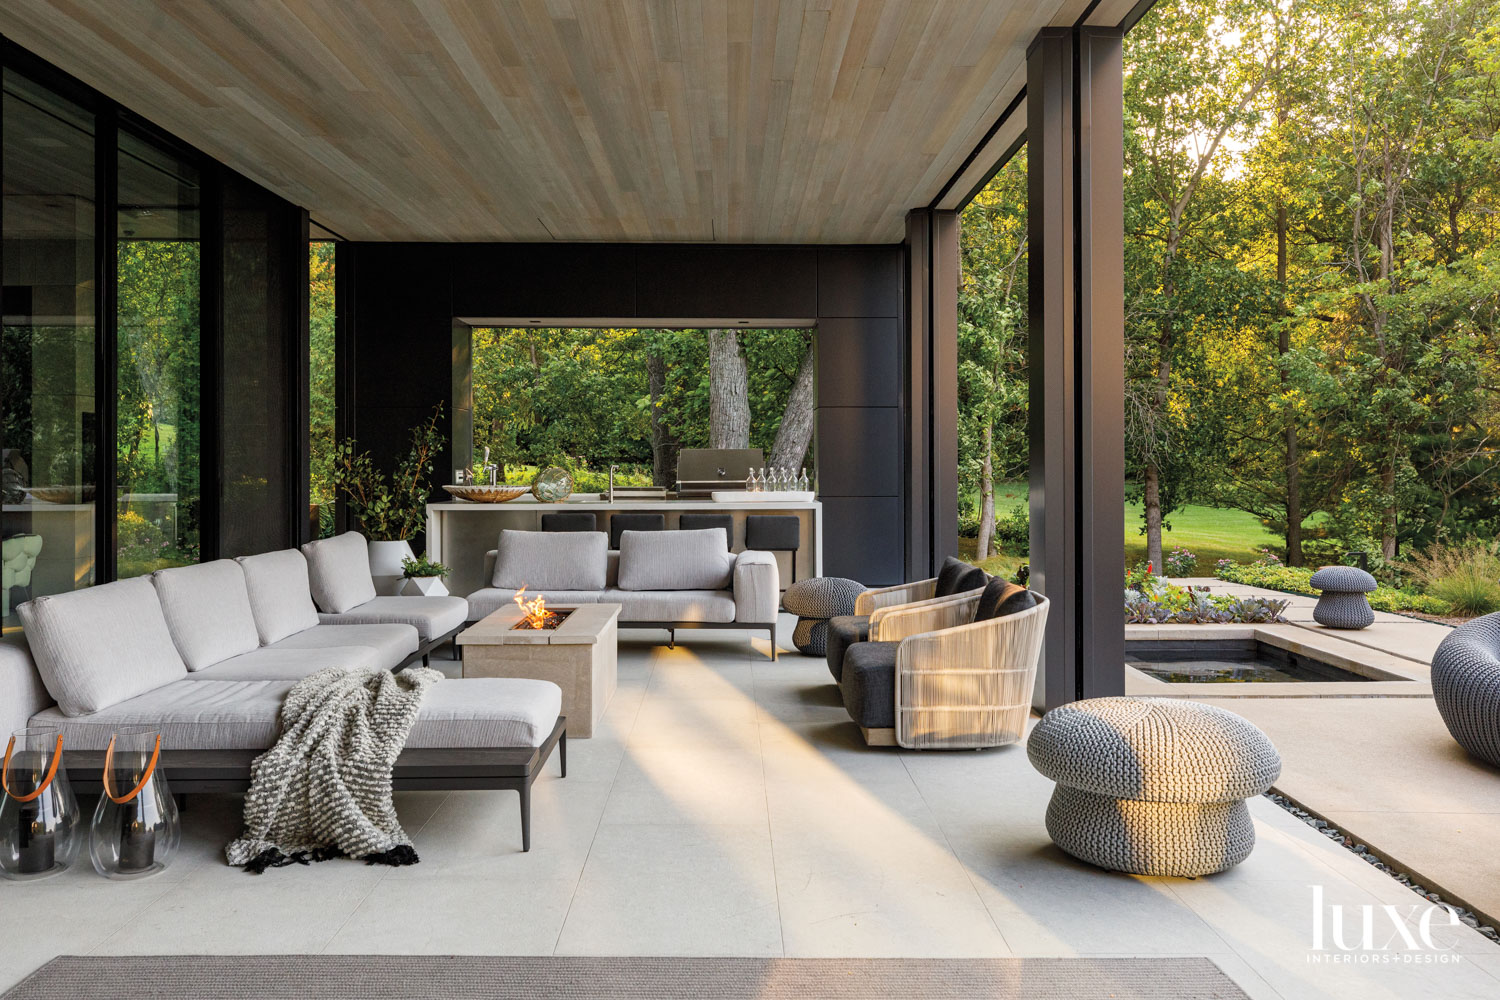 A covered patio with a...